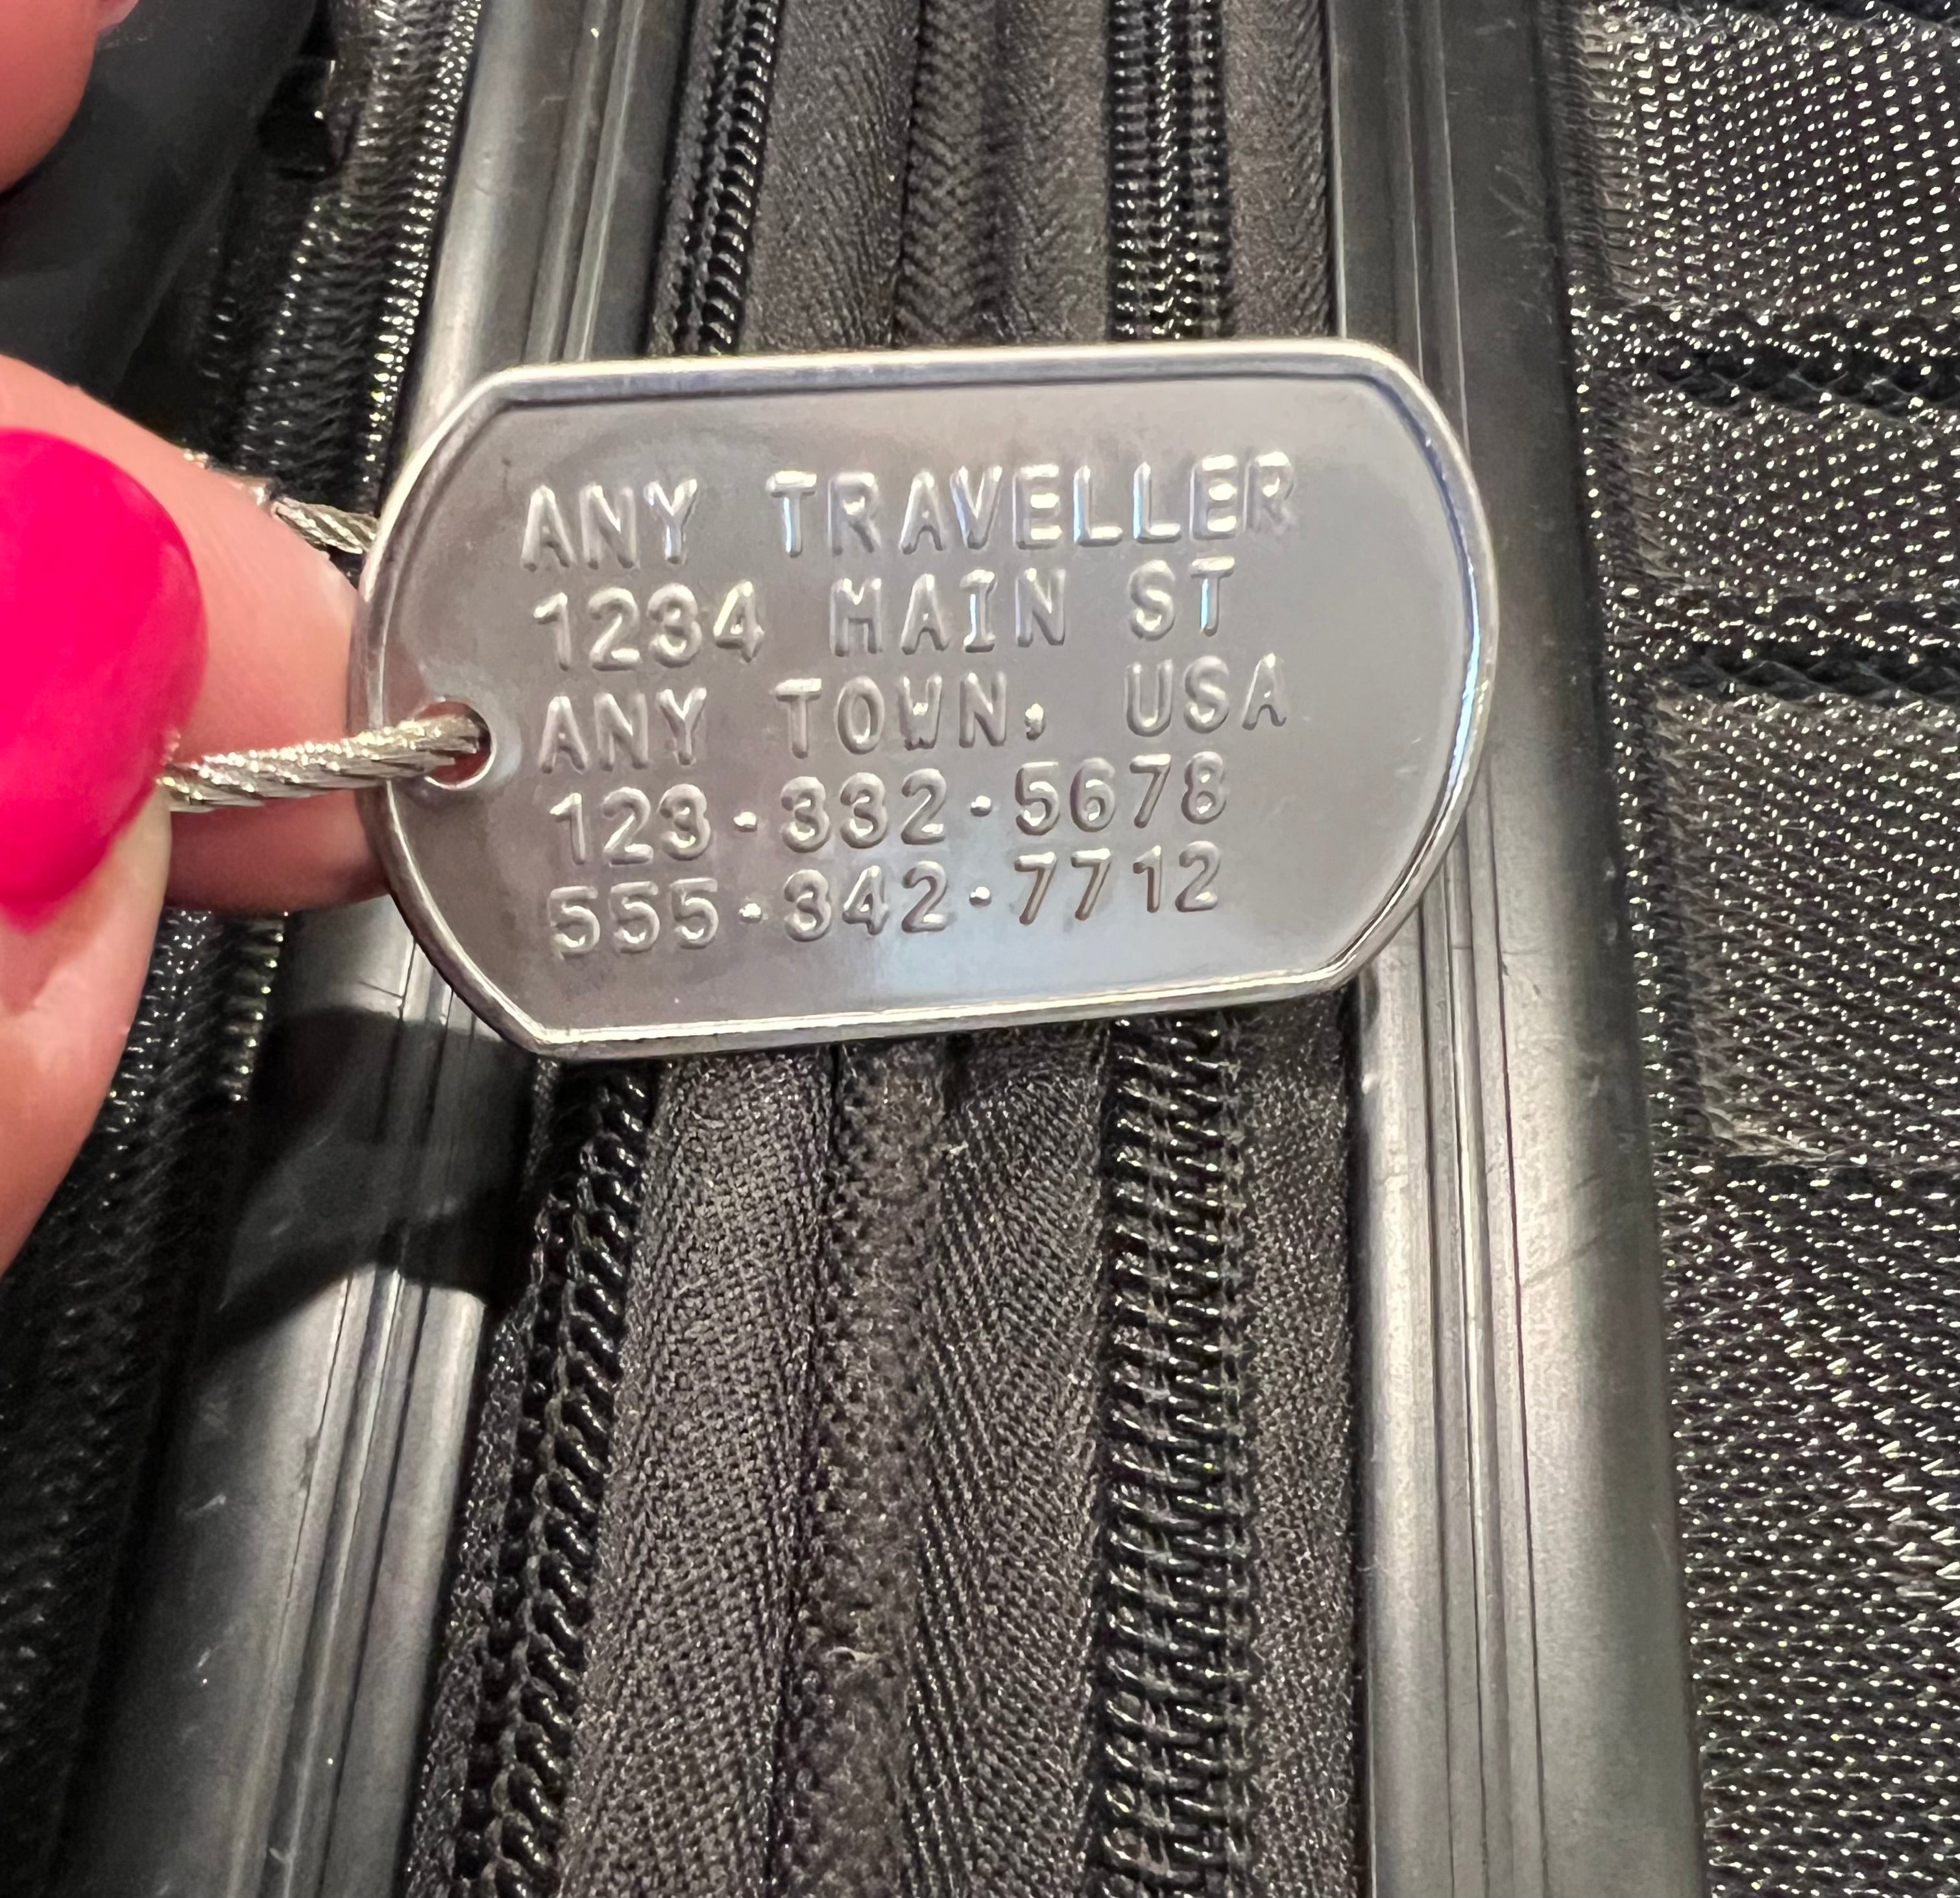 Indestructible stainless steel embossed stamped luggage baggage backpack suitcase tag ID label heavy duty HD extreme service tough